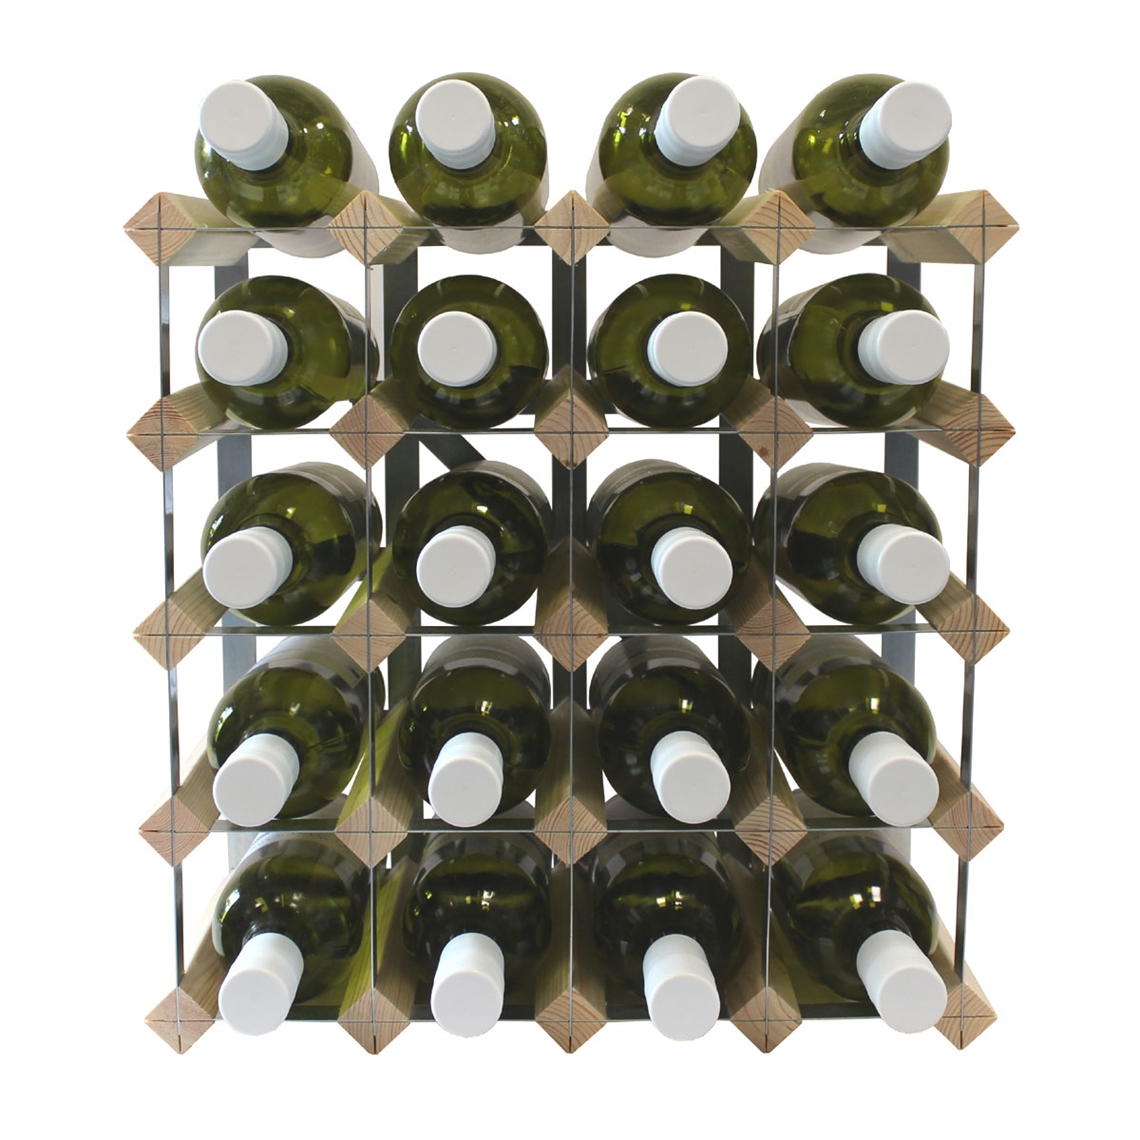 View more wine walls from our Assembled Wine Racks range